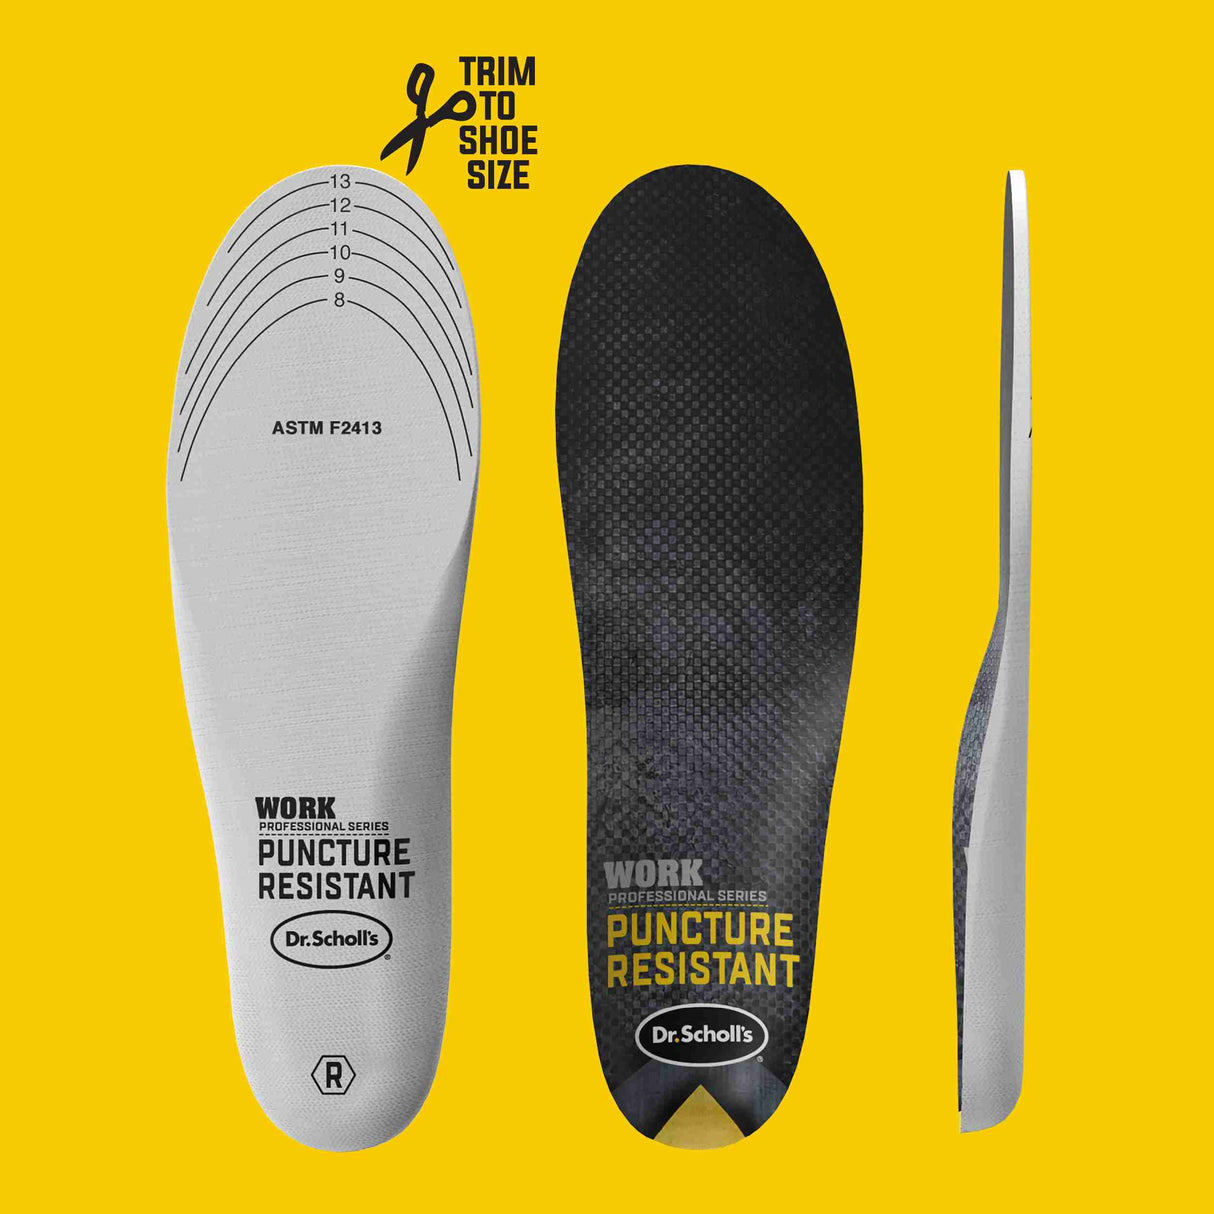 image of puncture resistant insoles bottom, top and side view on yellow background